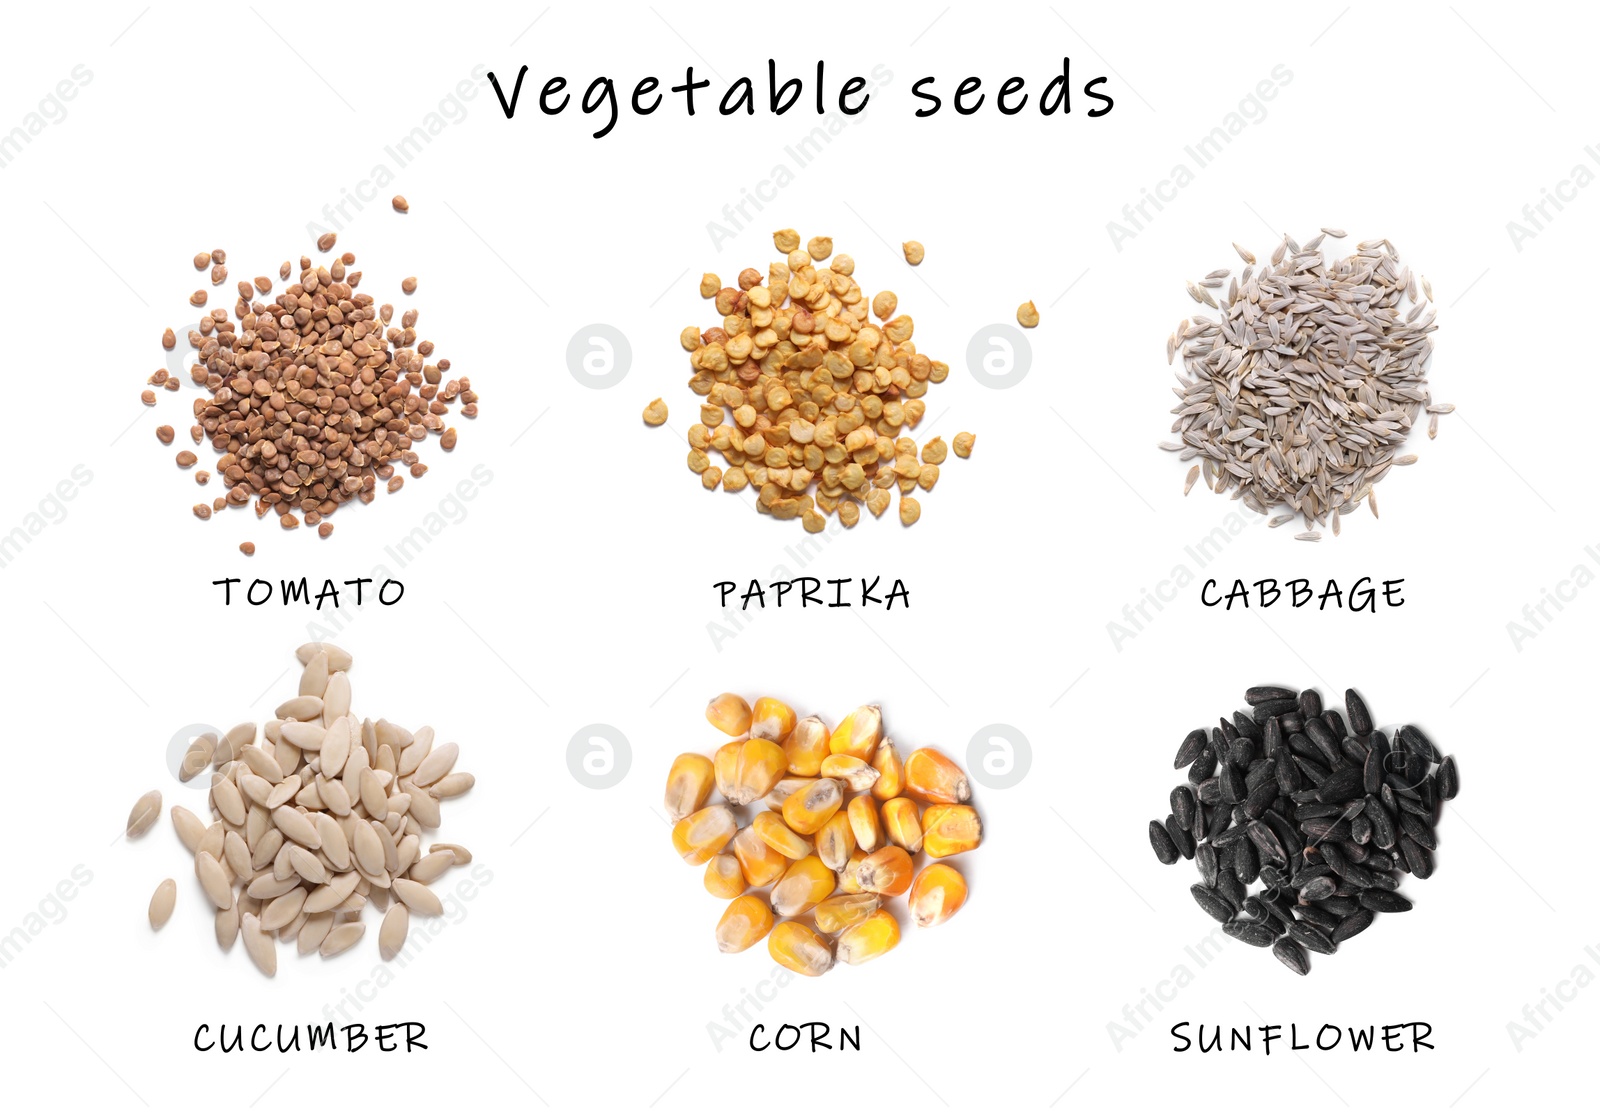 Image of Set of vegetable seeds and its names on white background, top view. Tomato, paprika, cabbage, cucumber, corn and sunflower